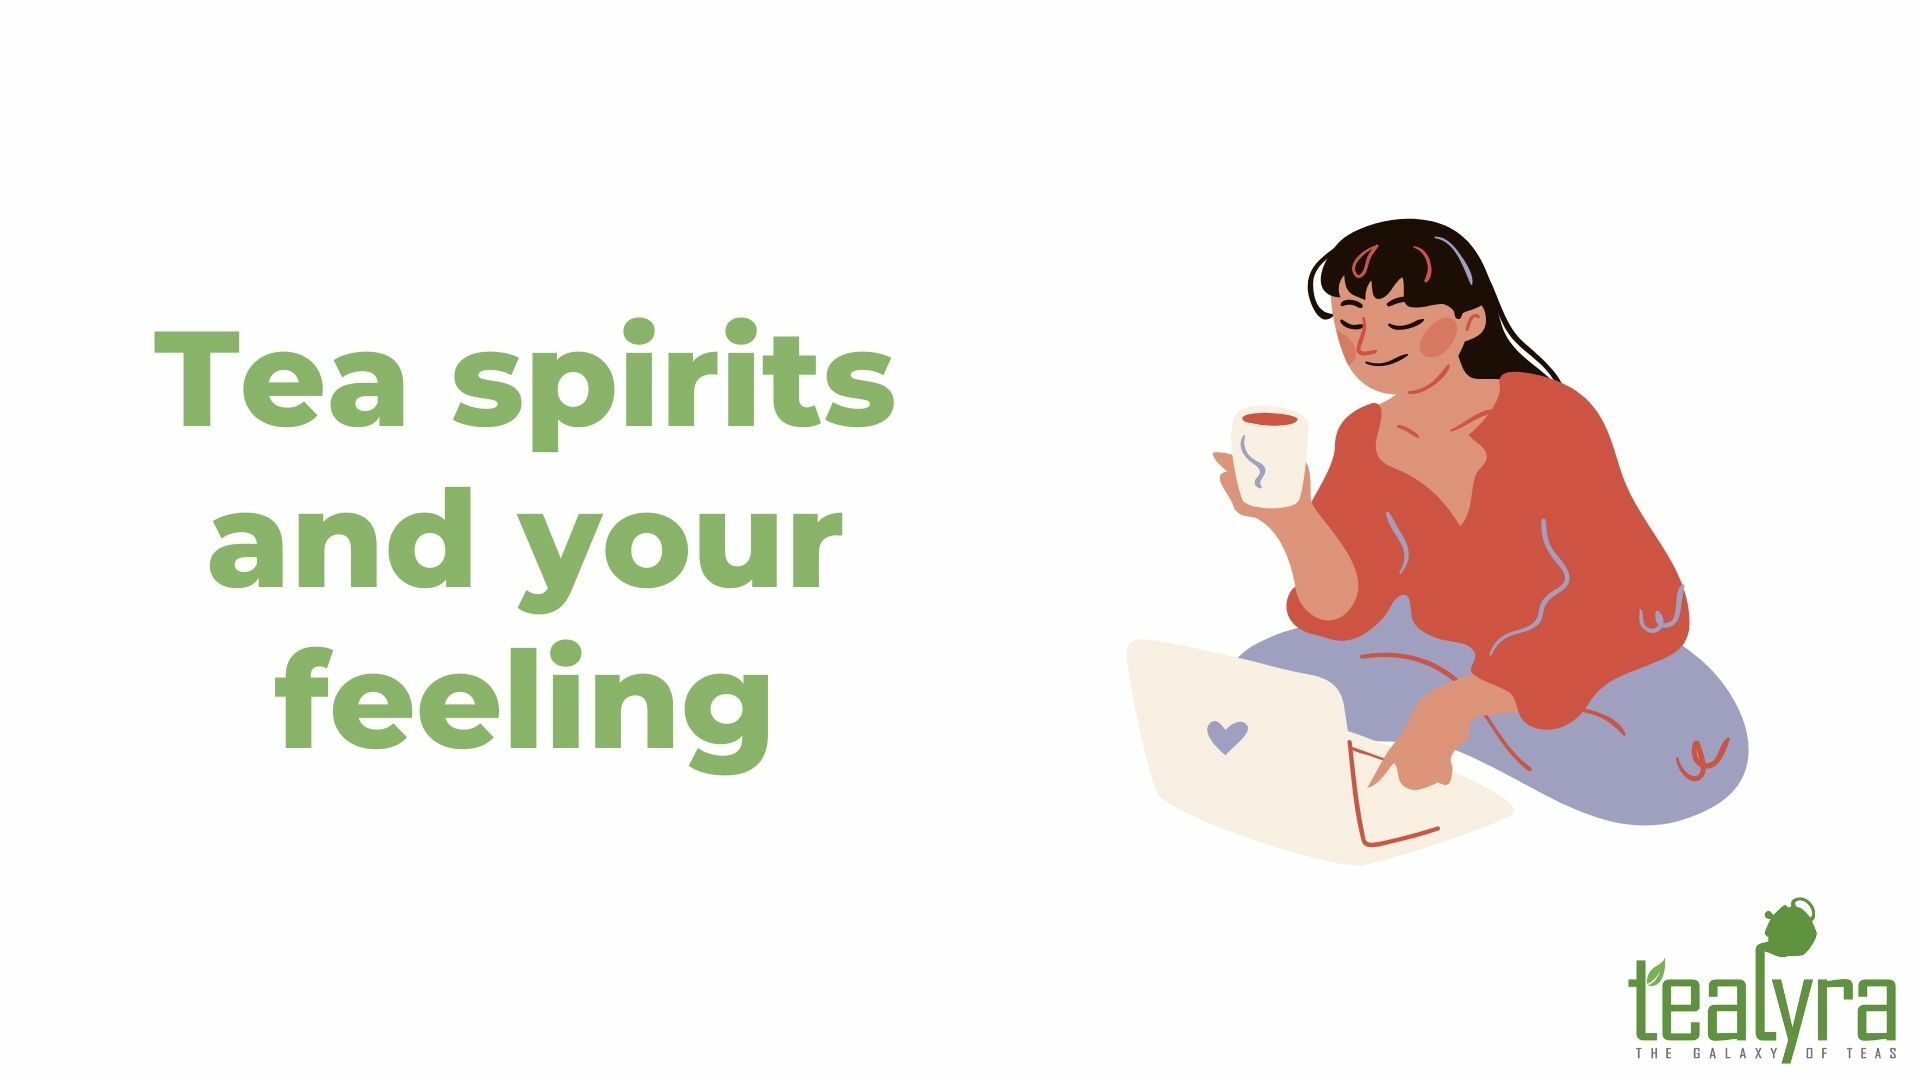 image-tea-spirits-and-your-feeling